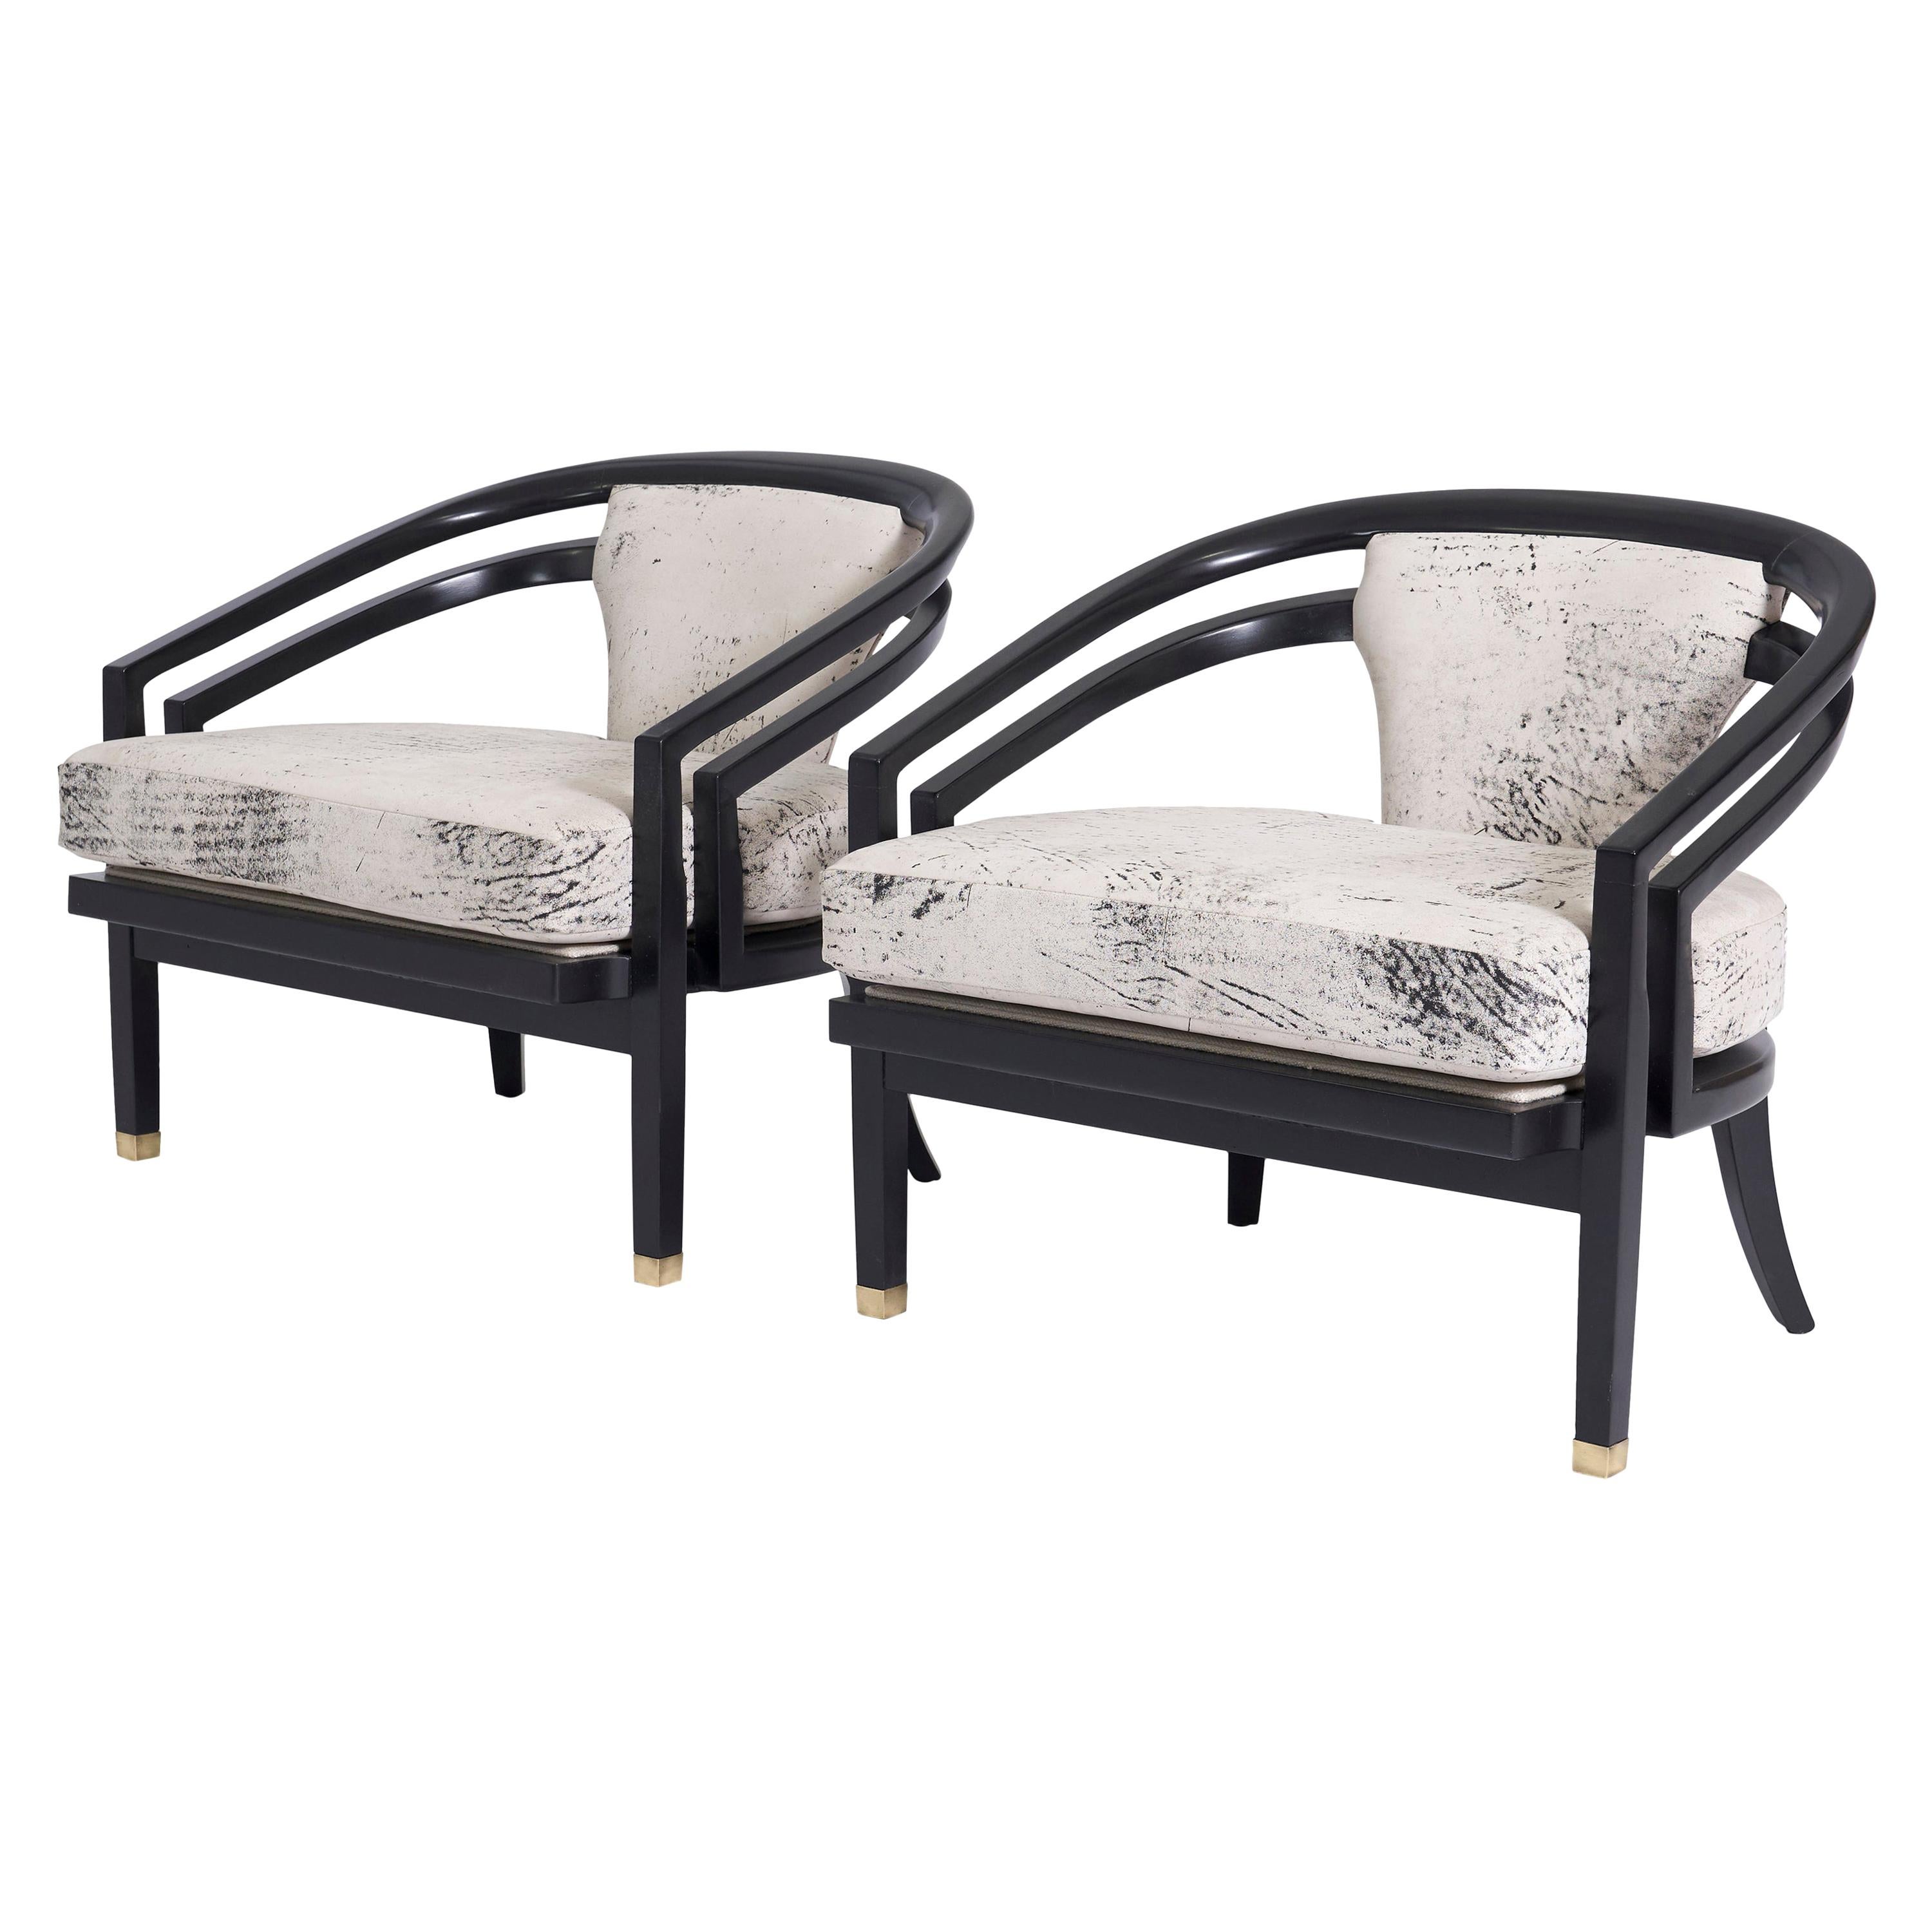 Open Frame Lounge Chairs, Attributed to Harvey Probber